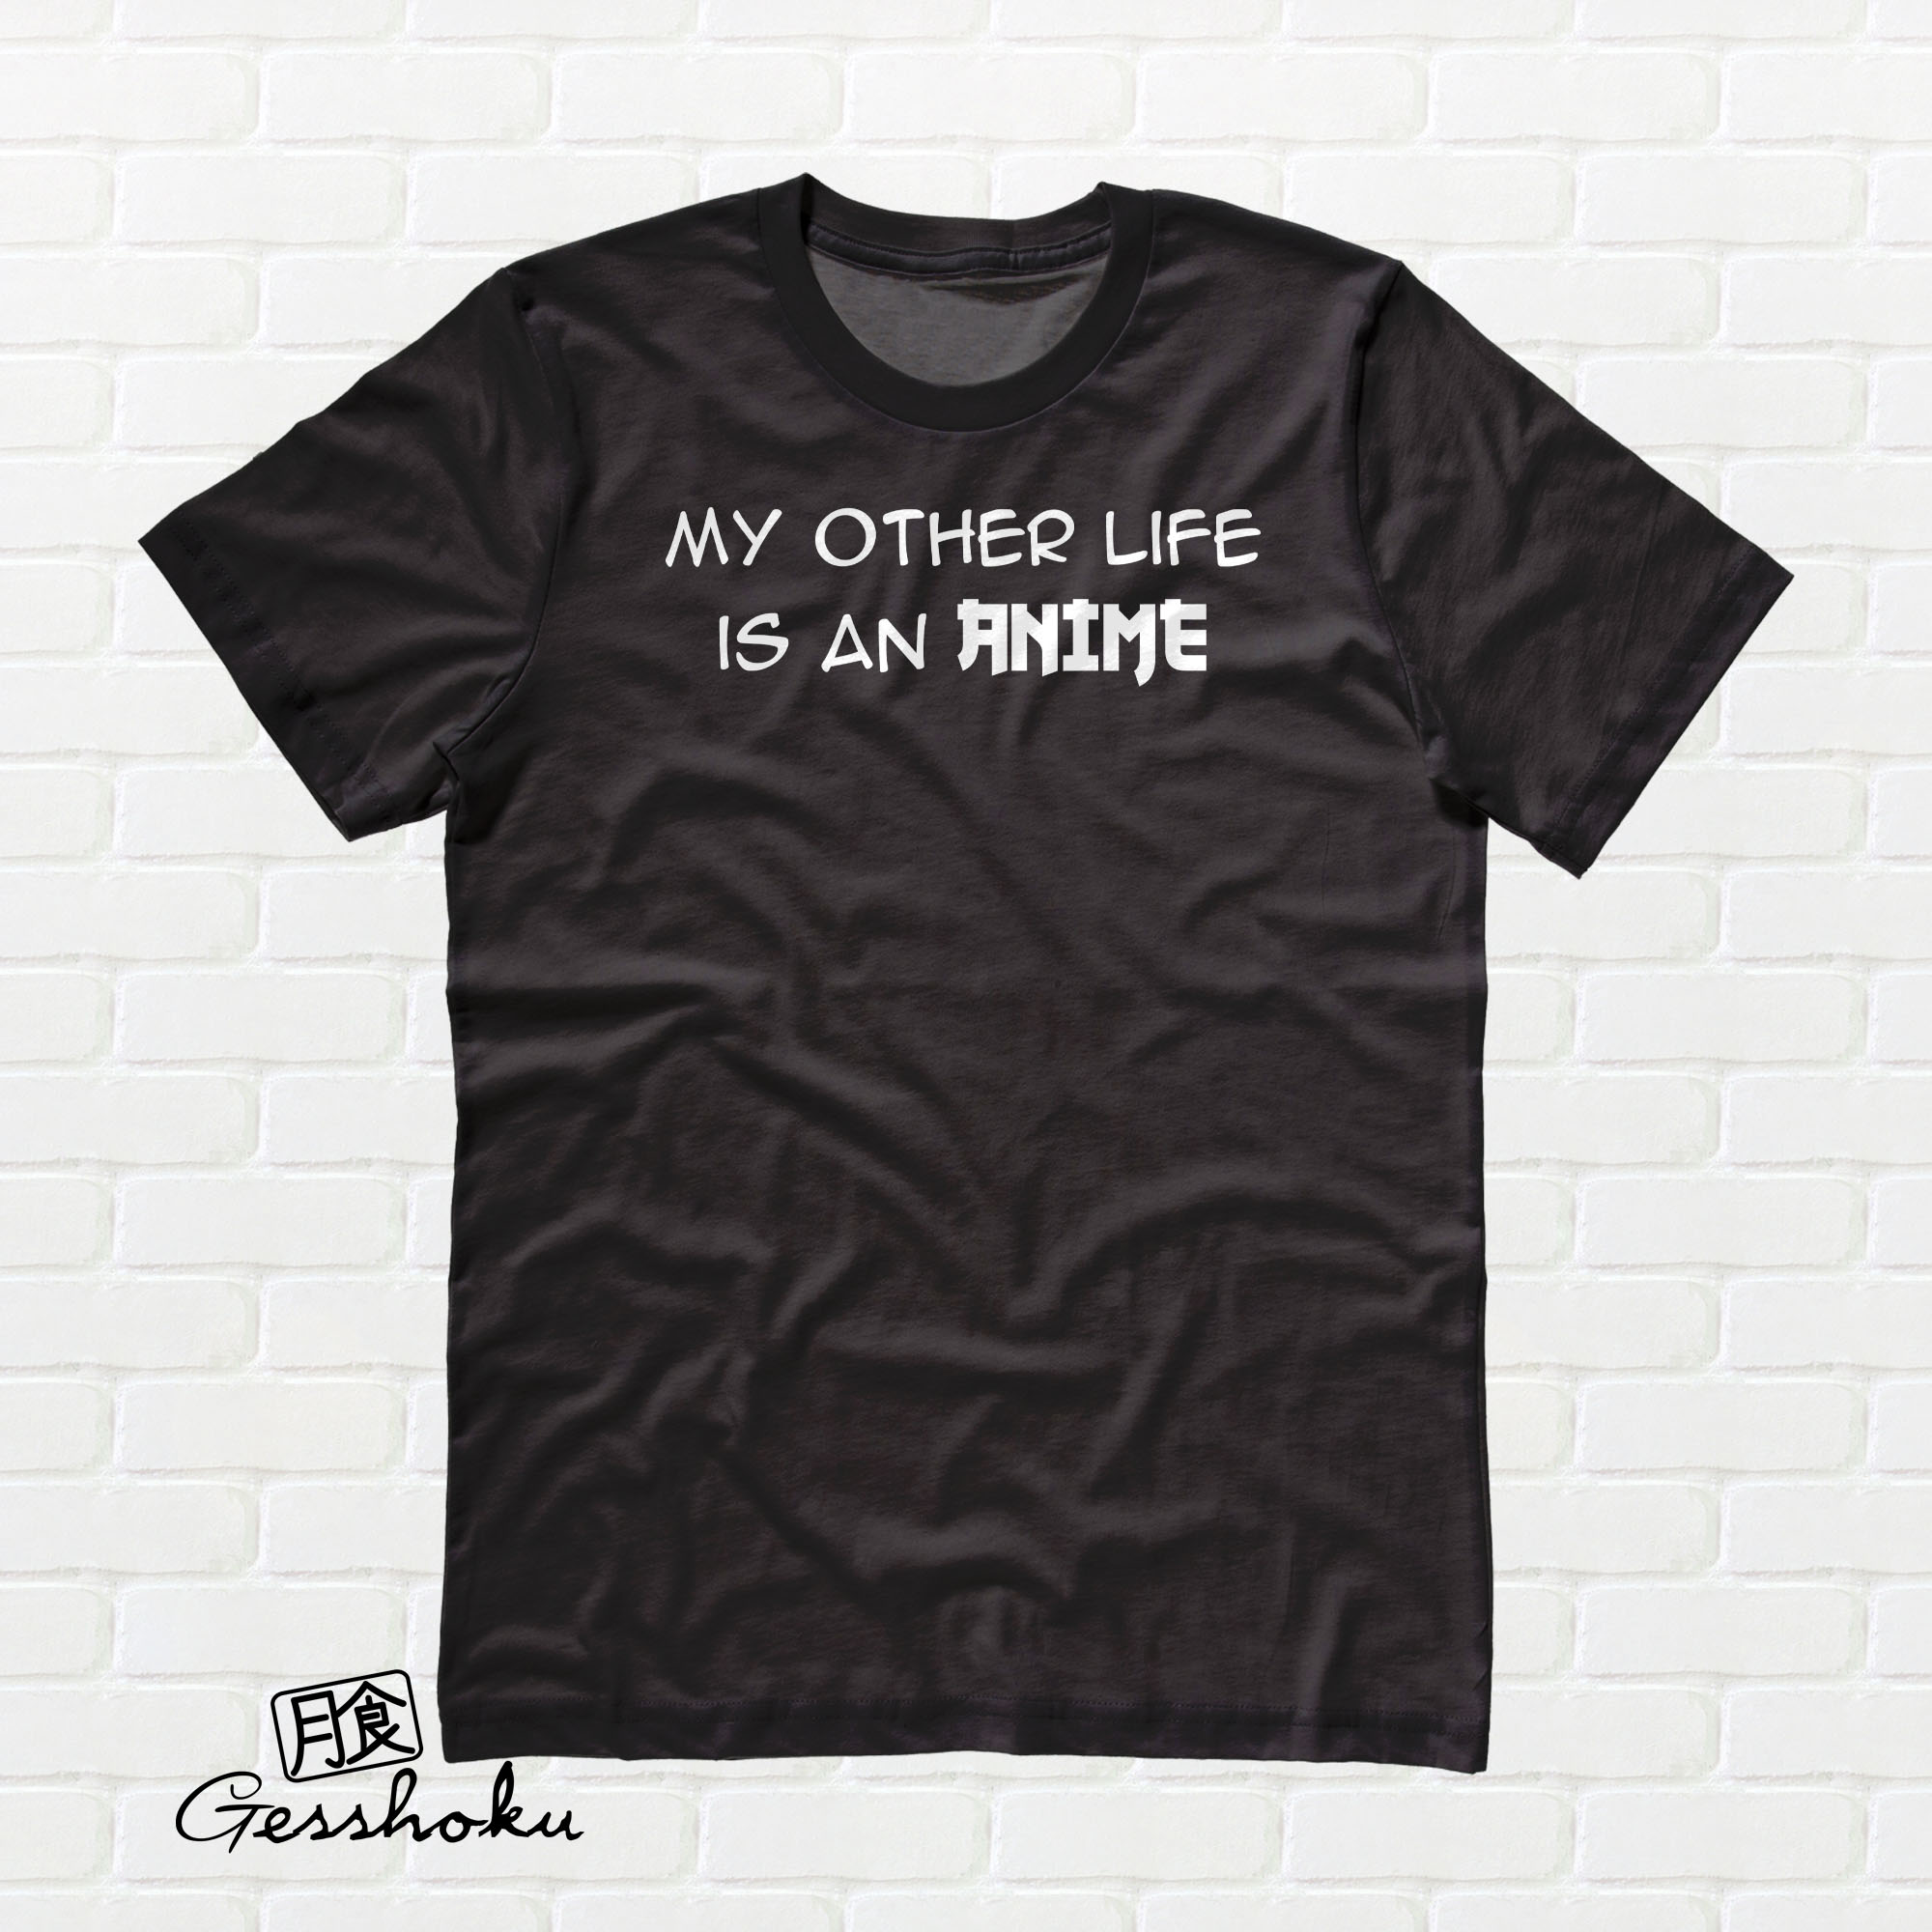 My Other Life is an Anime T-shirt - Black